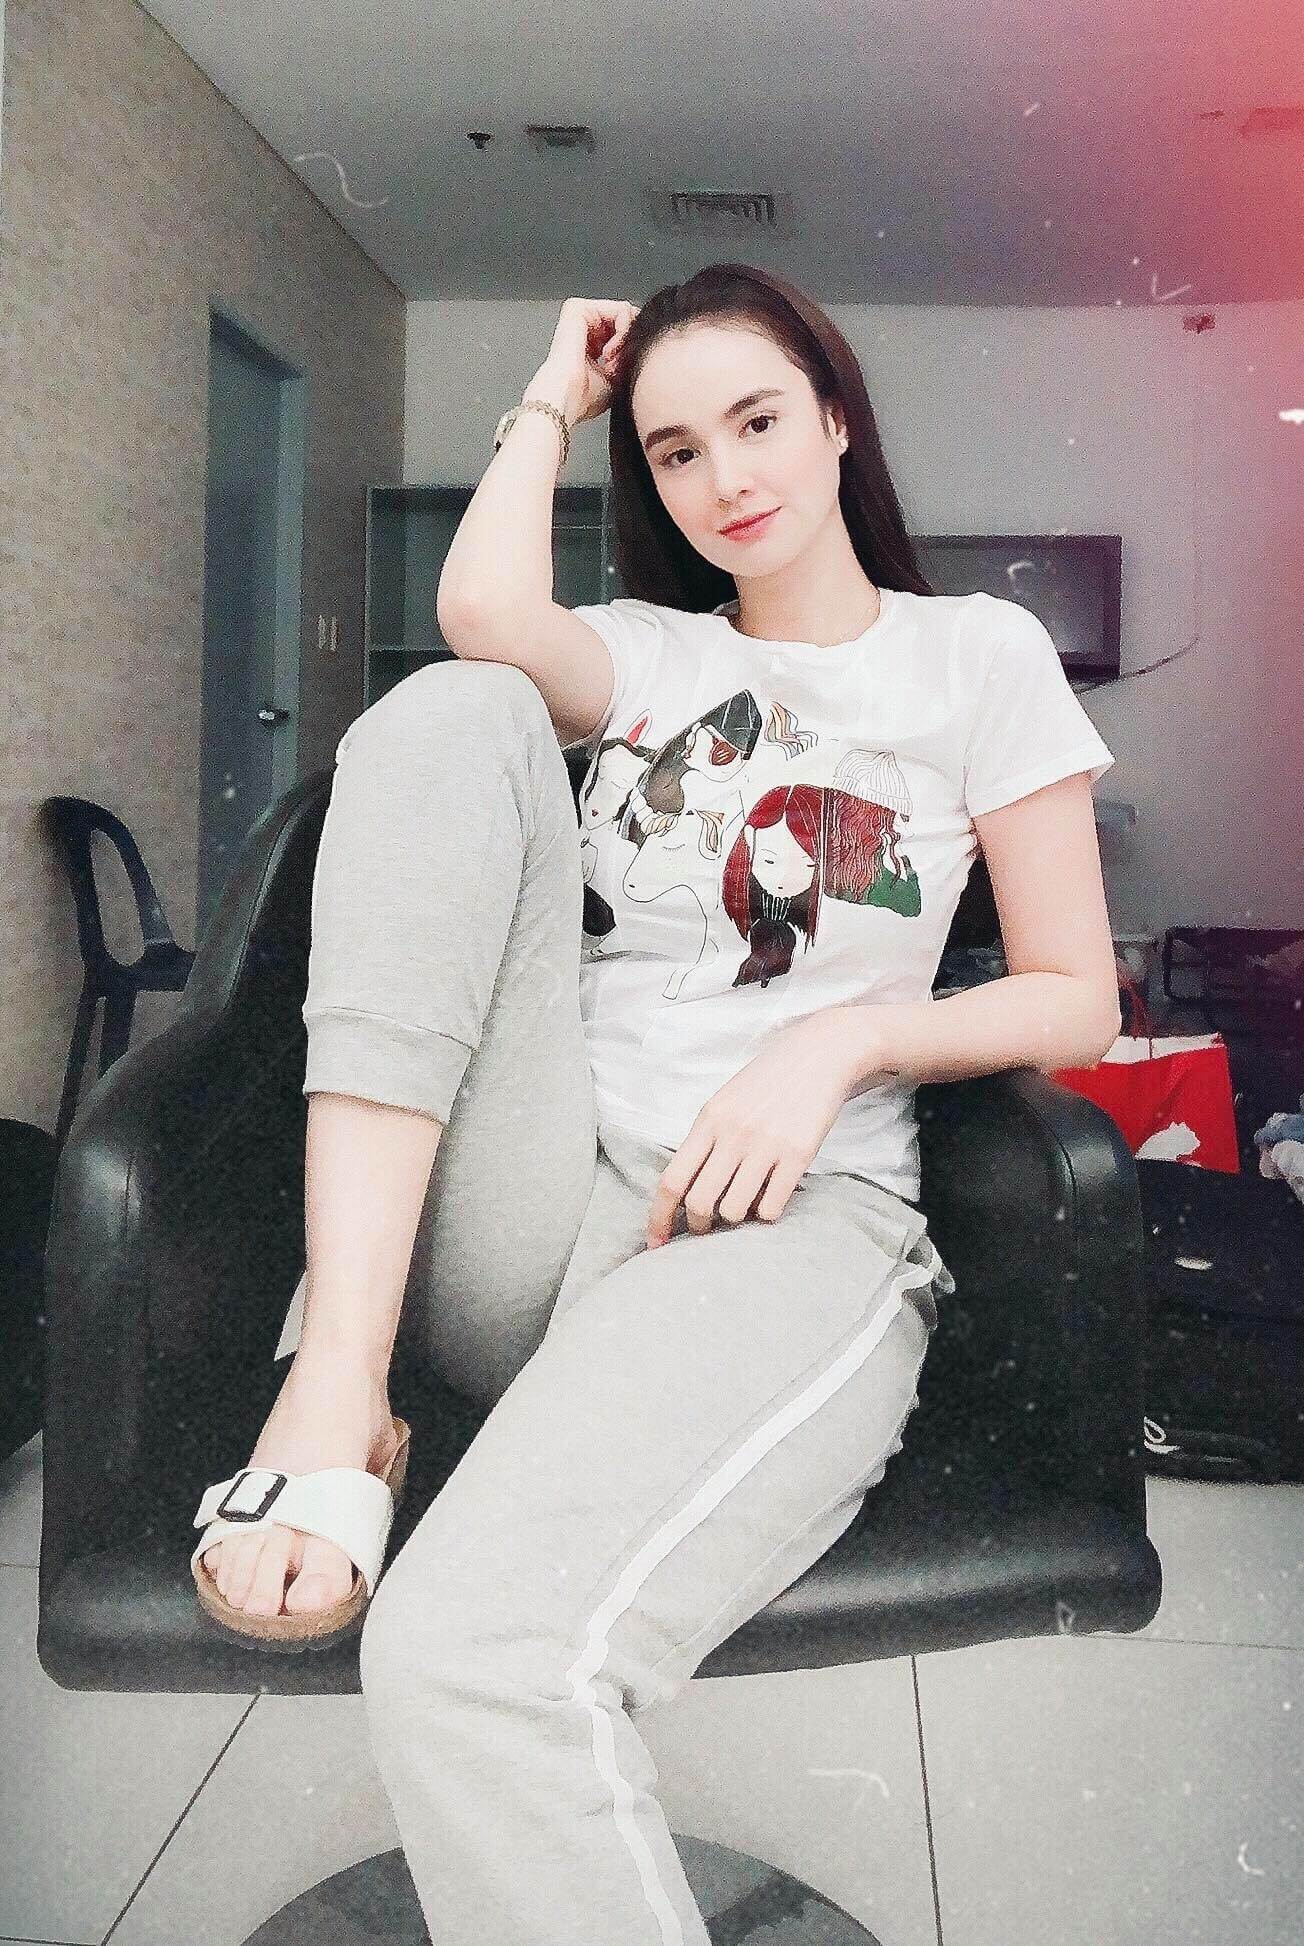 50 Hot And Sexy Kim Domingo Photos That Will Melt Your Heart 12thblog